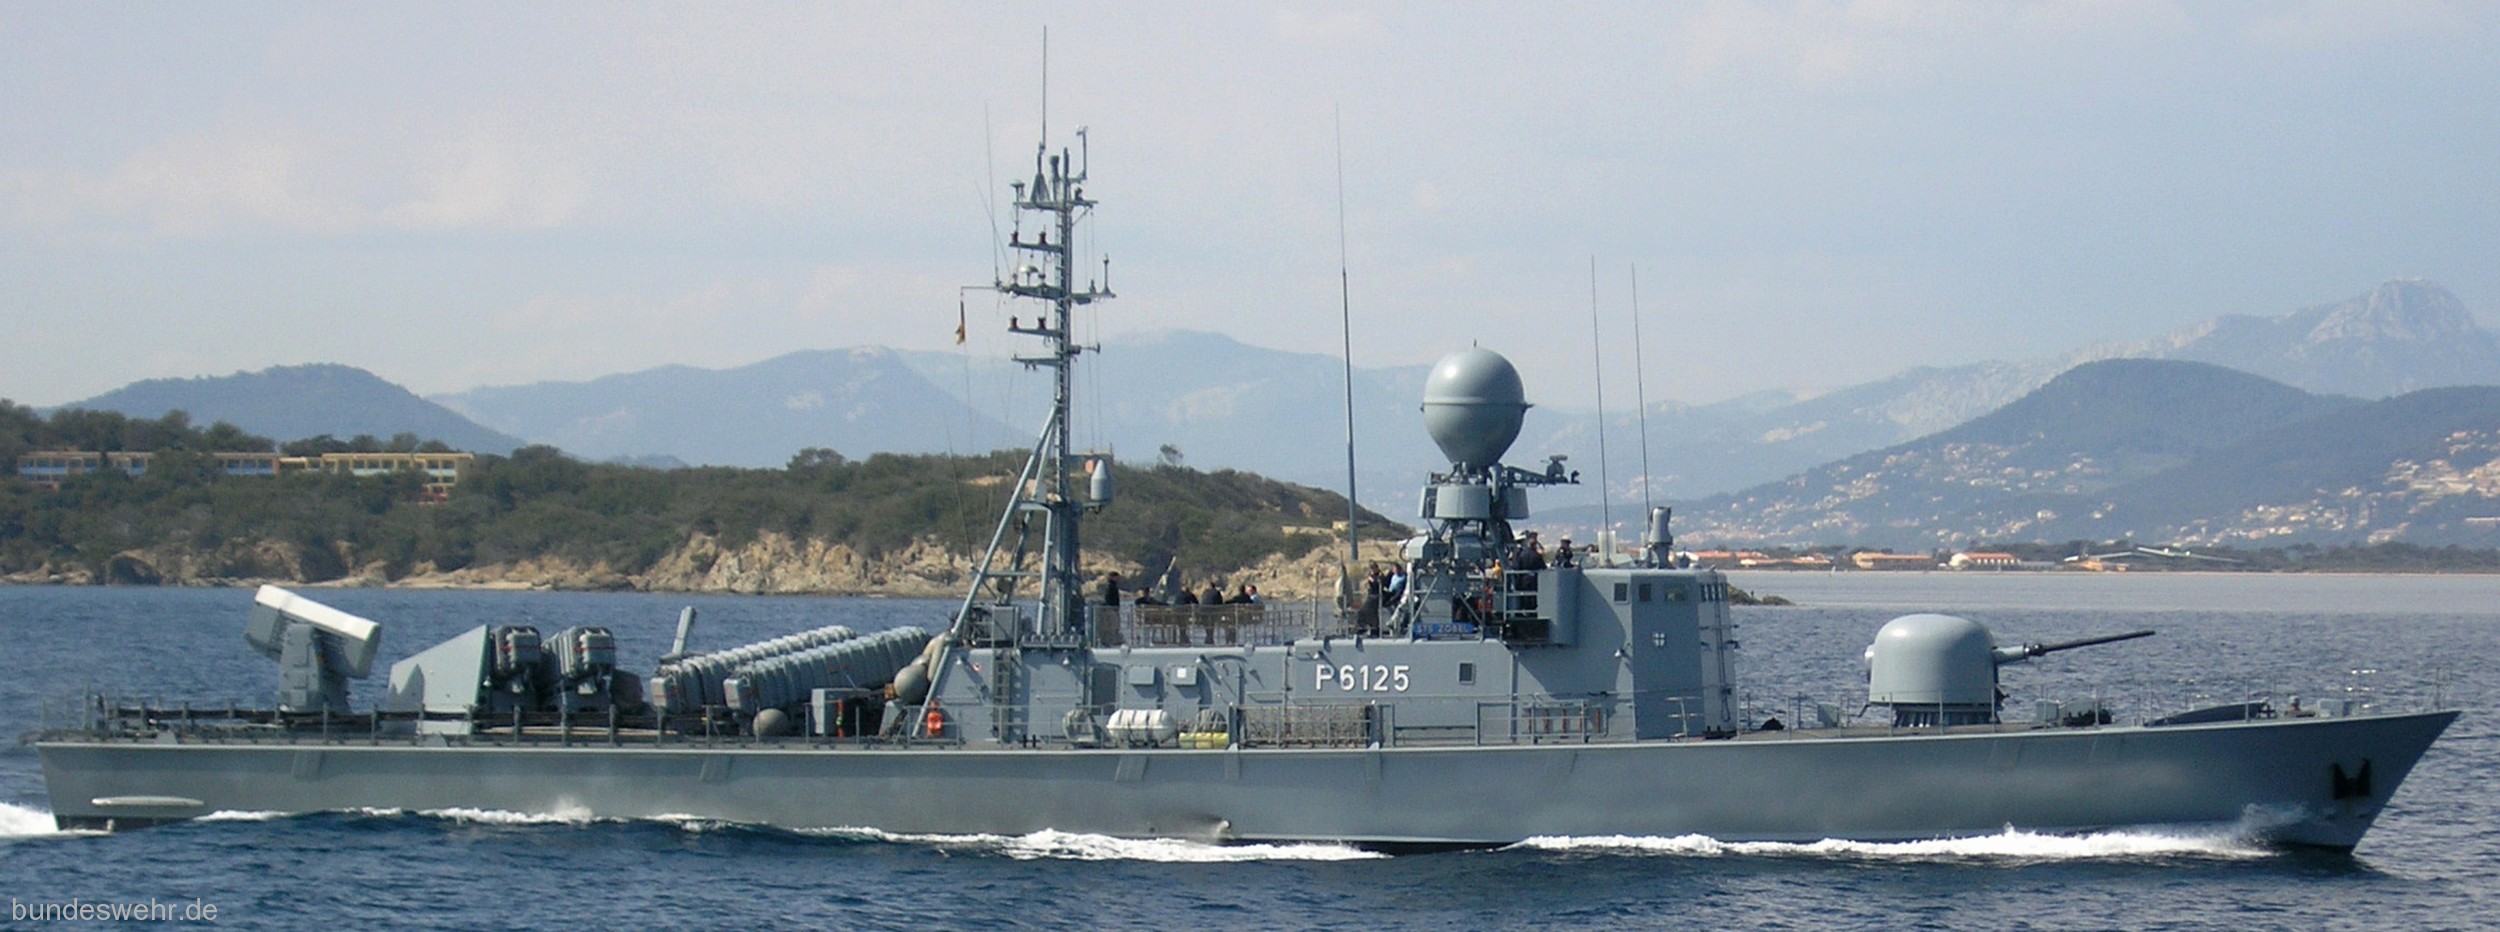 p6125 s75 fgs zobel type 143a gepard class fast attack missile craft german navy 03